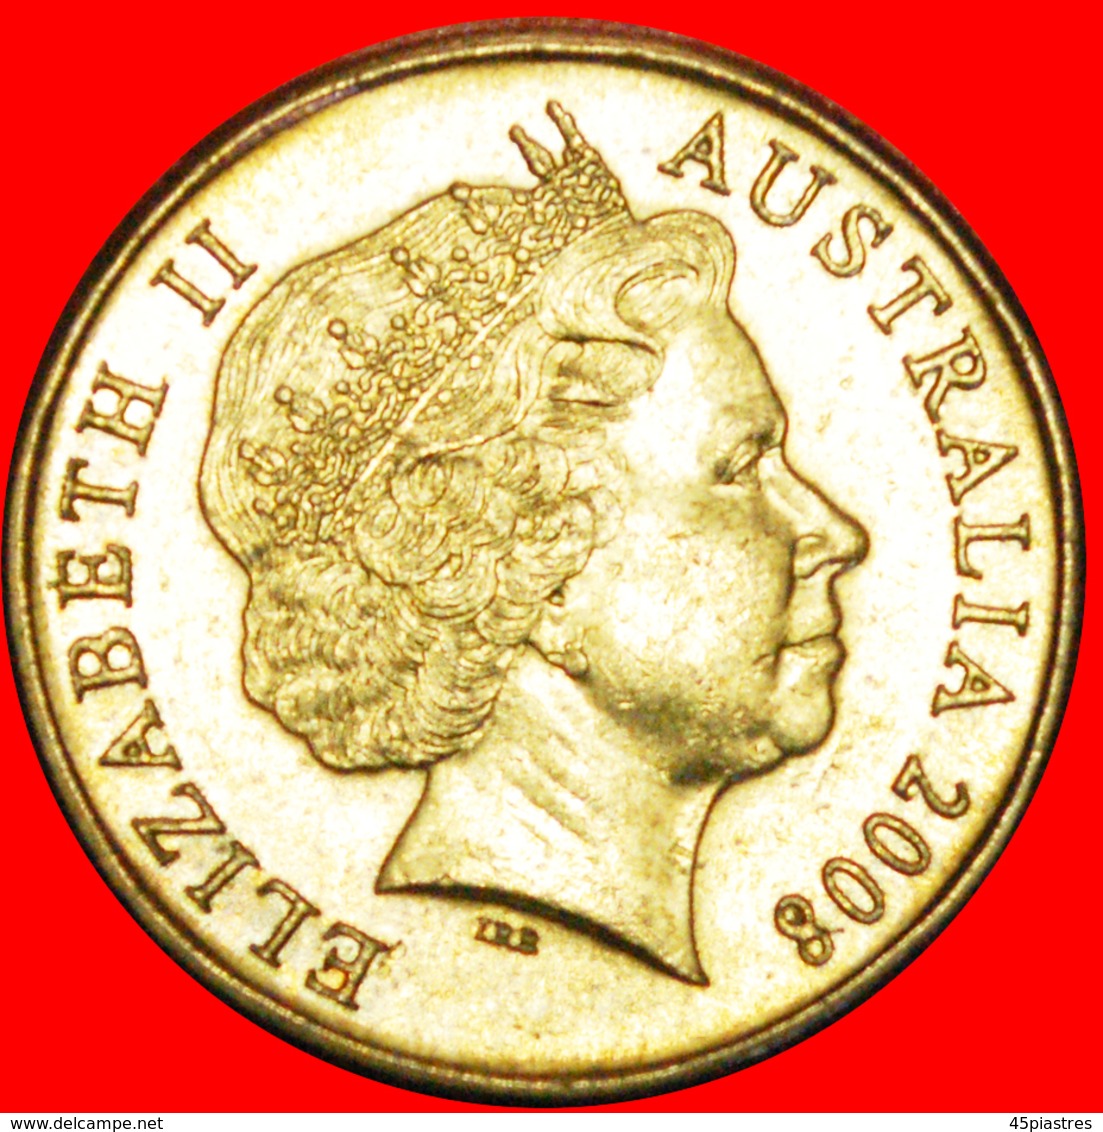 + SOUTHERN CROSS AND SCOUTS 1908: AUSTRALIA ★ 1 DOLLAR 2008 MINT LUSTER! LOW START ★ NO RESERVE! - Dollar